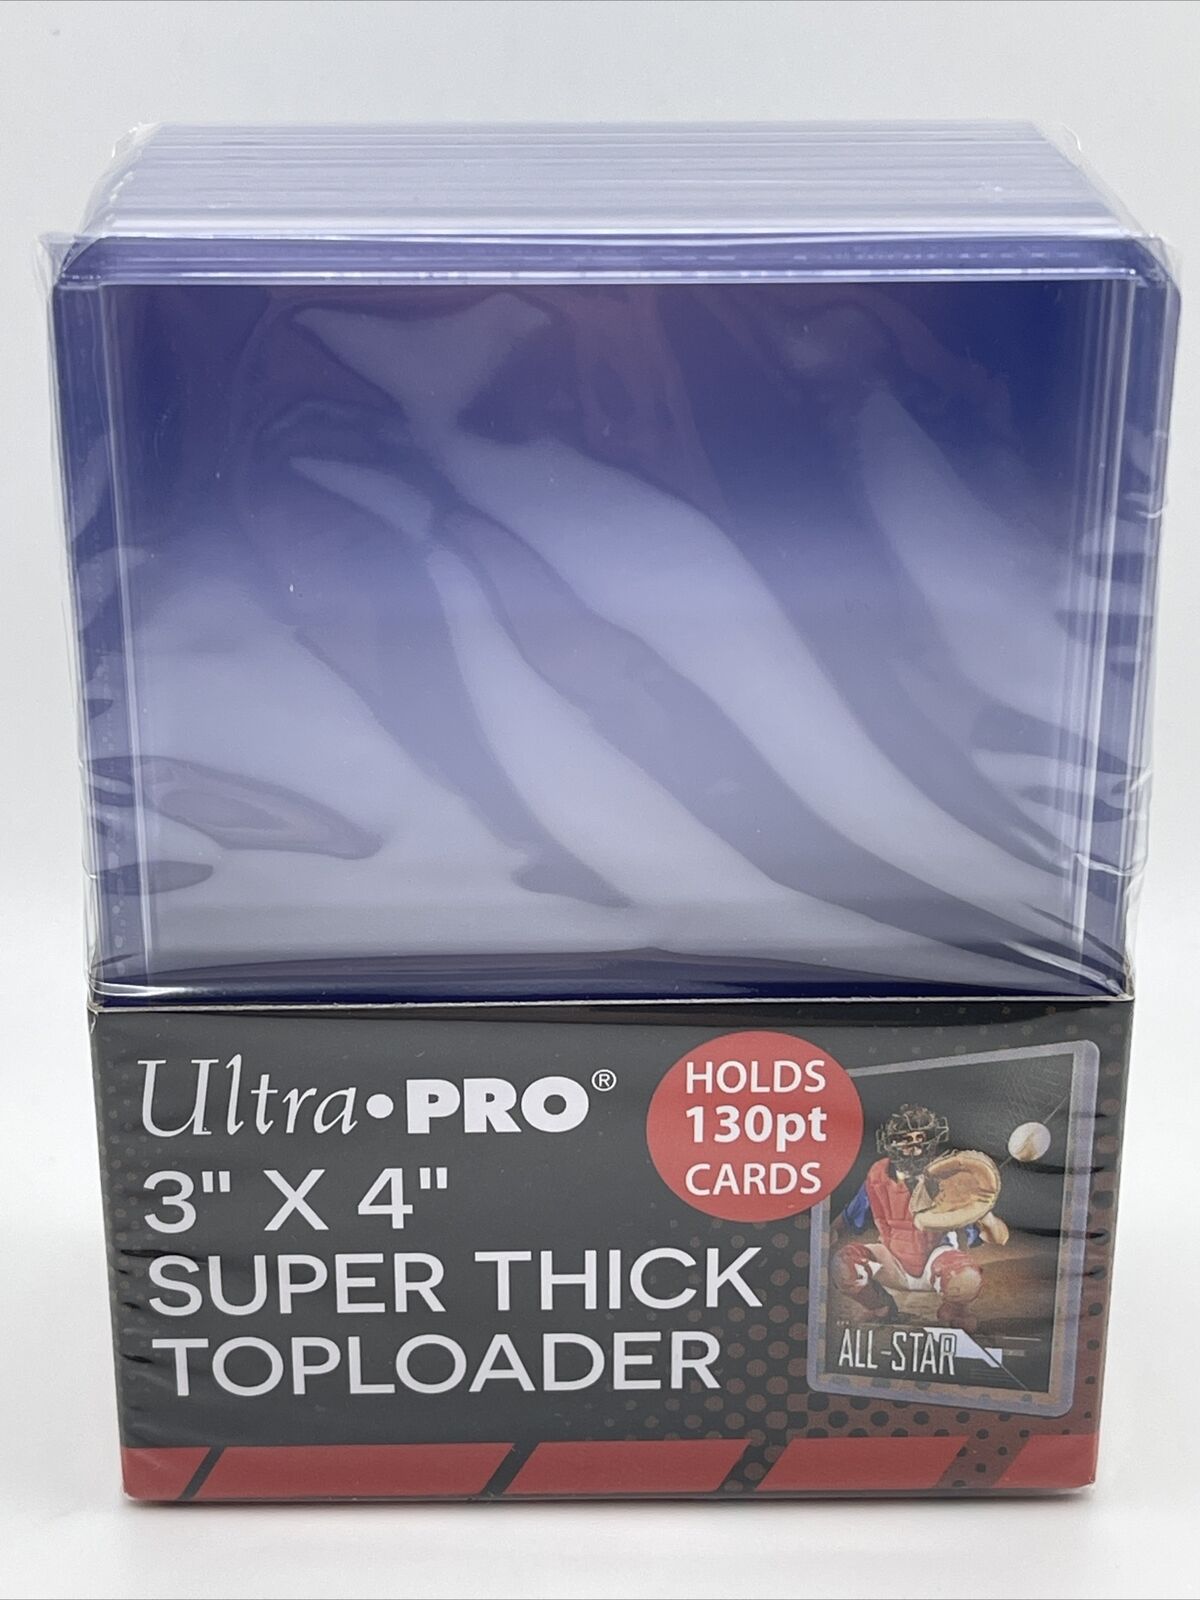 Ultra Pro 3X4 Super Thick Toploaders 130pt Point 1 Pack of 10 for Thick Cards 